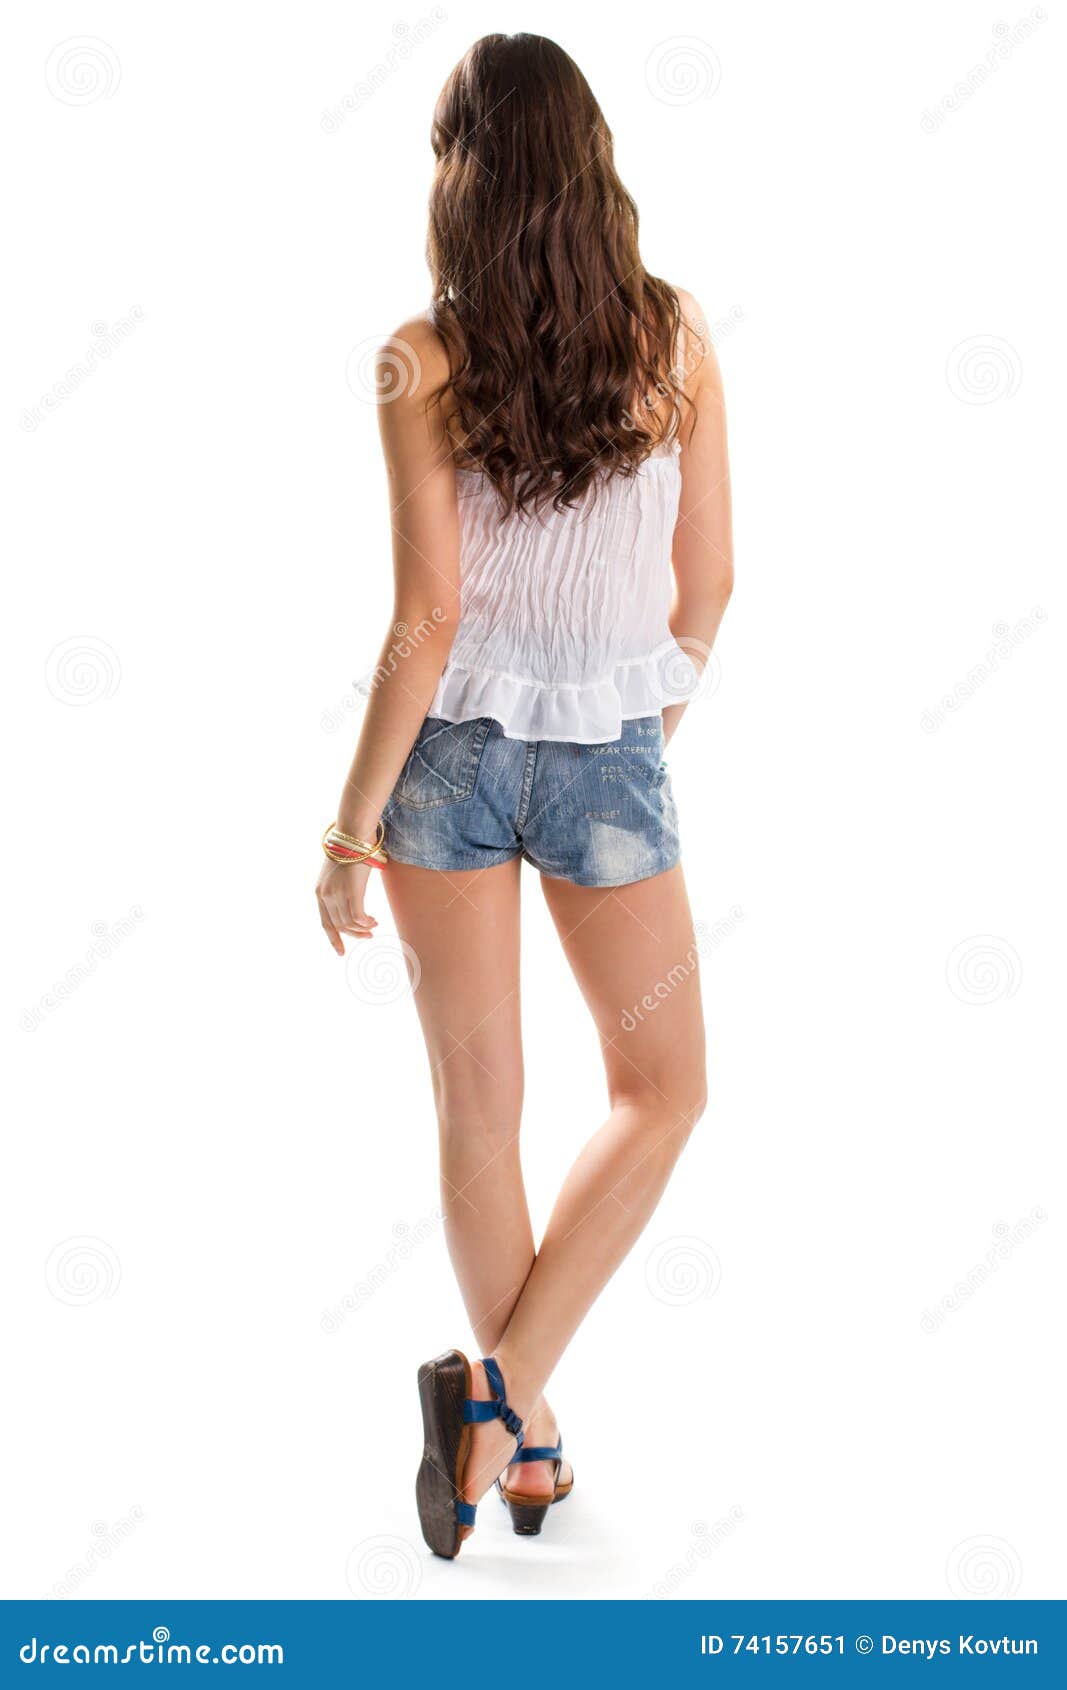 Download Lady in short shorts. stock image. Image of light, girl ...